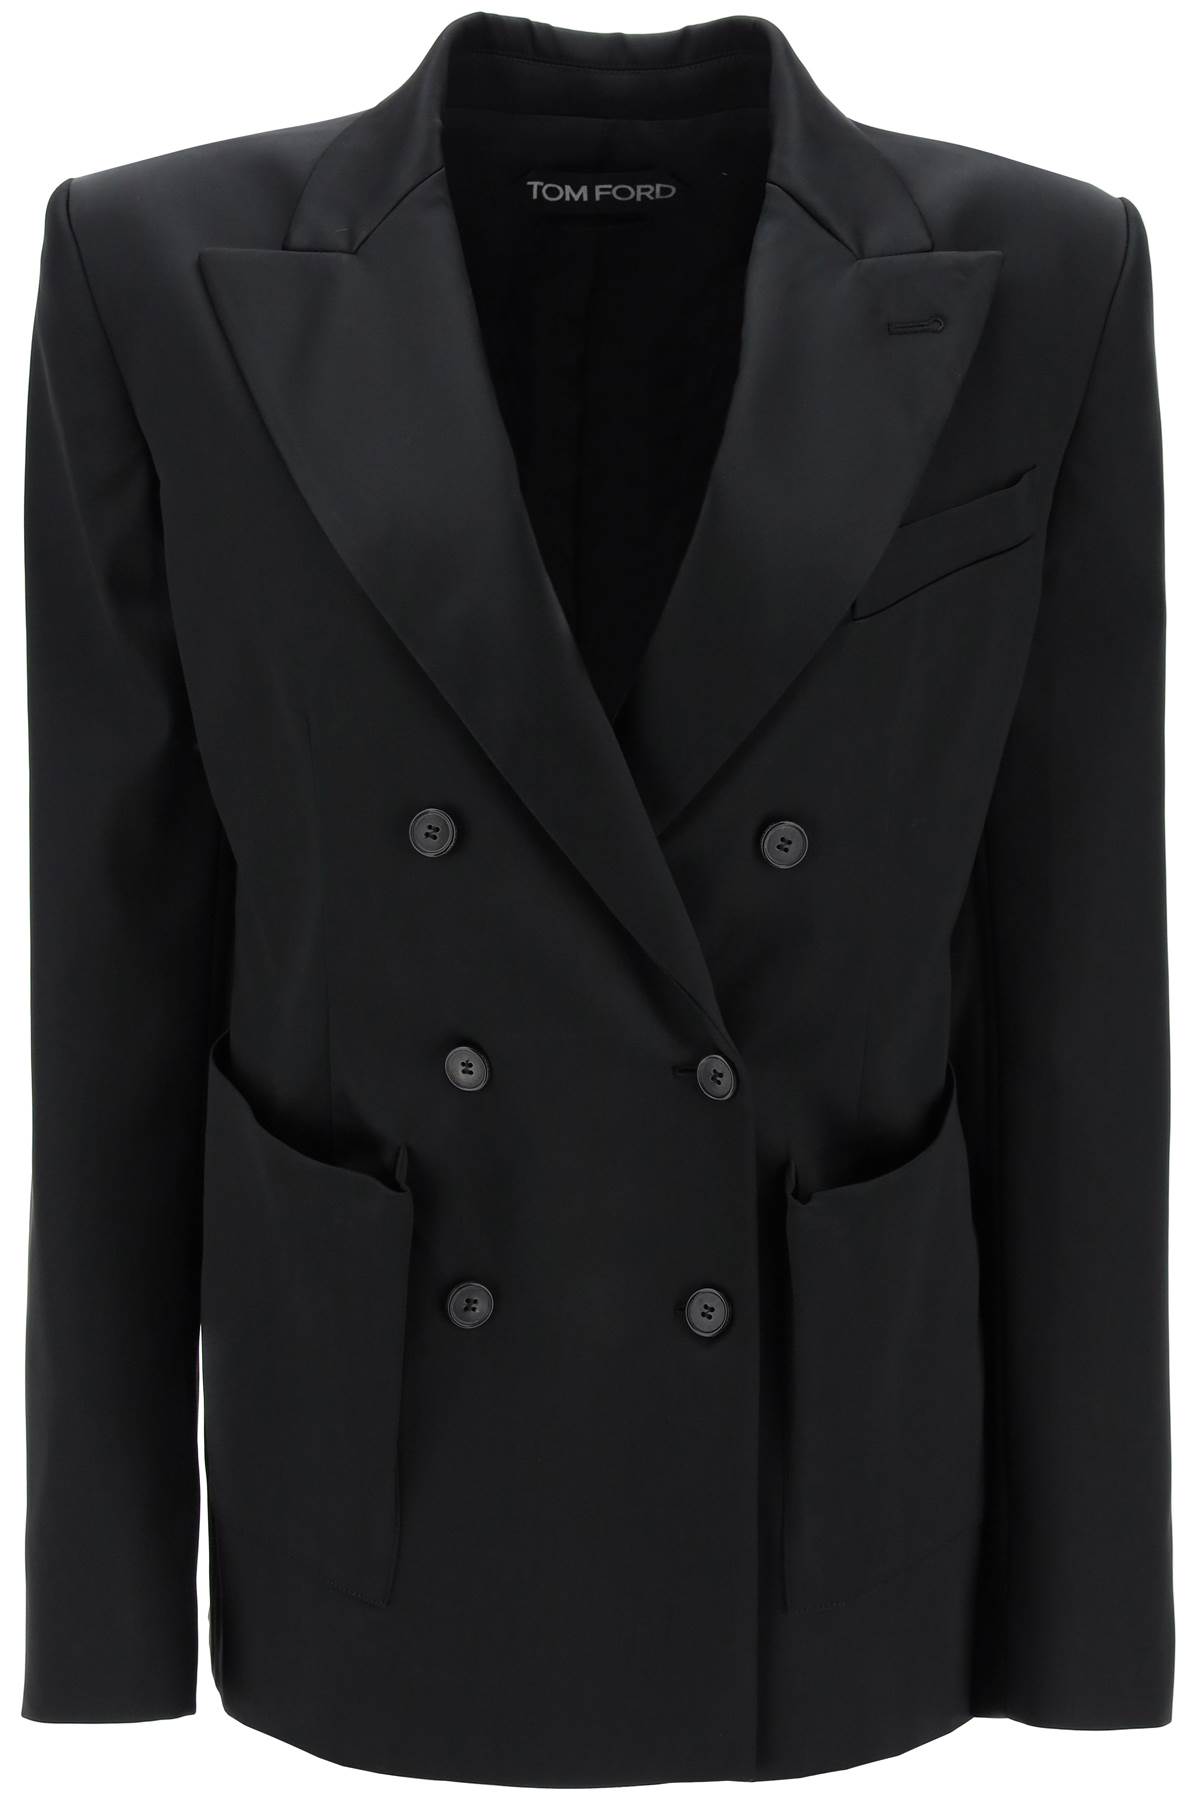 TOM FORD DOUBLE-BREASTED DUCHESSE BLAZER